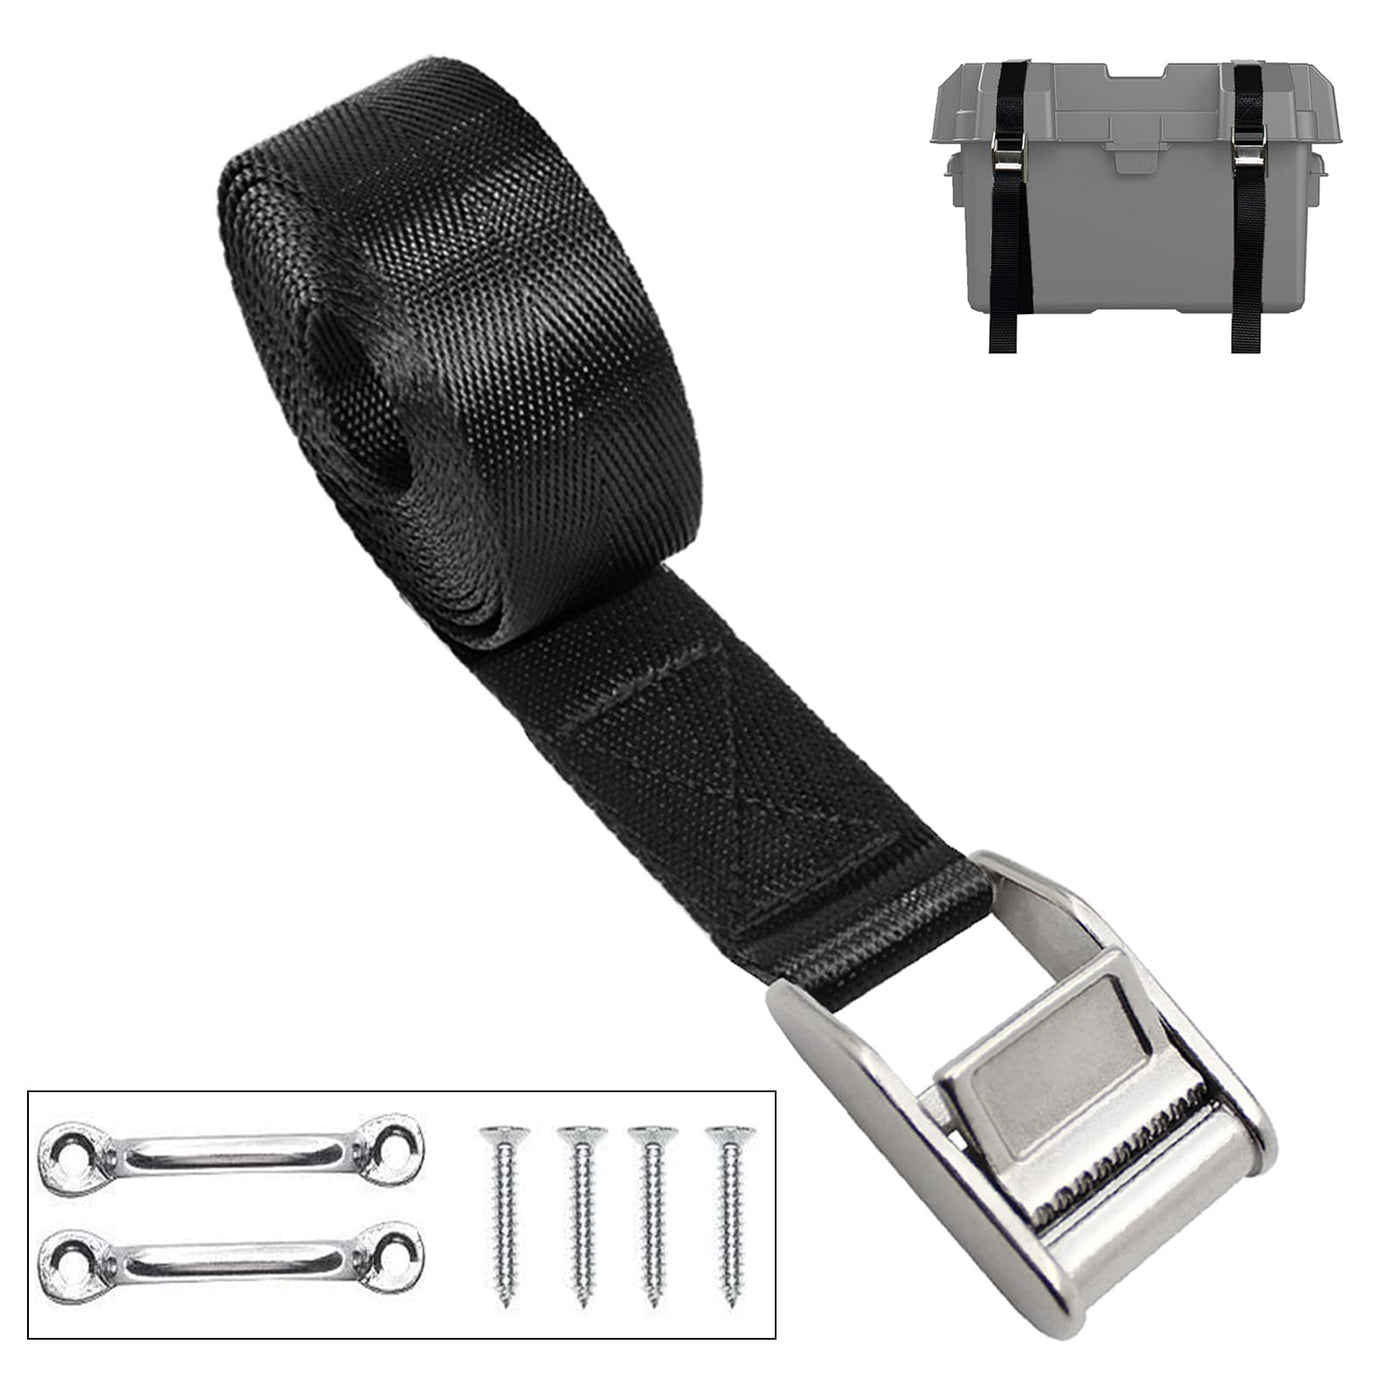 2PCS Lashing Straps Pressure Buckle Straps with Buckles Adjustable, Up to  600Lbs, Tie Down for Motorcycle, Cargo, Trucks, Trailer, Luggage